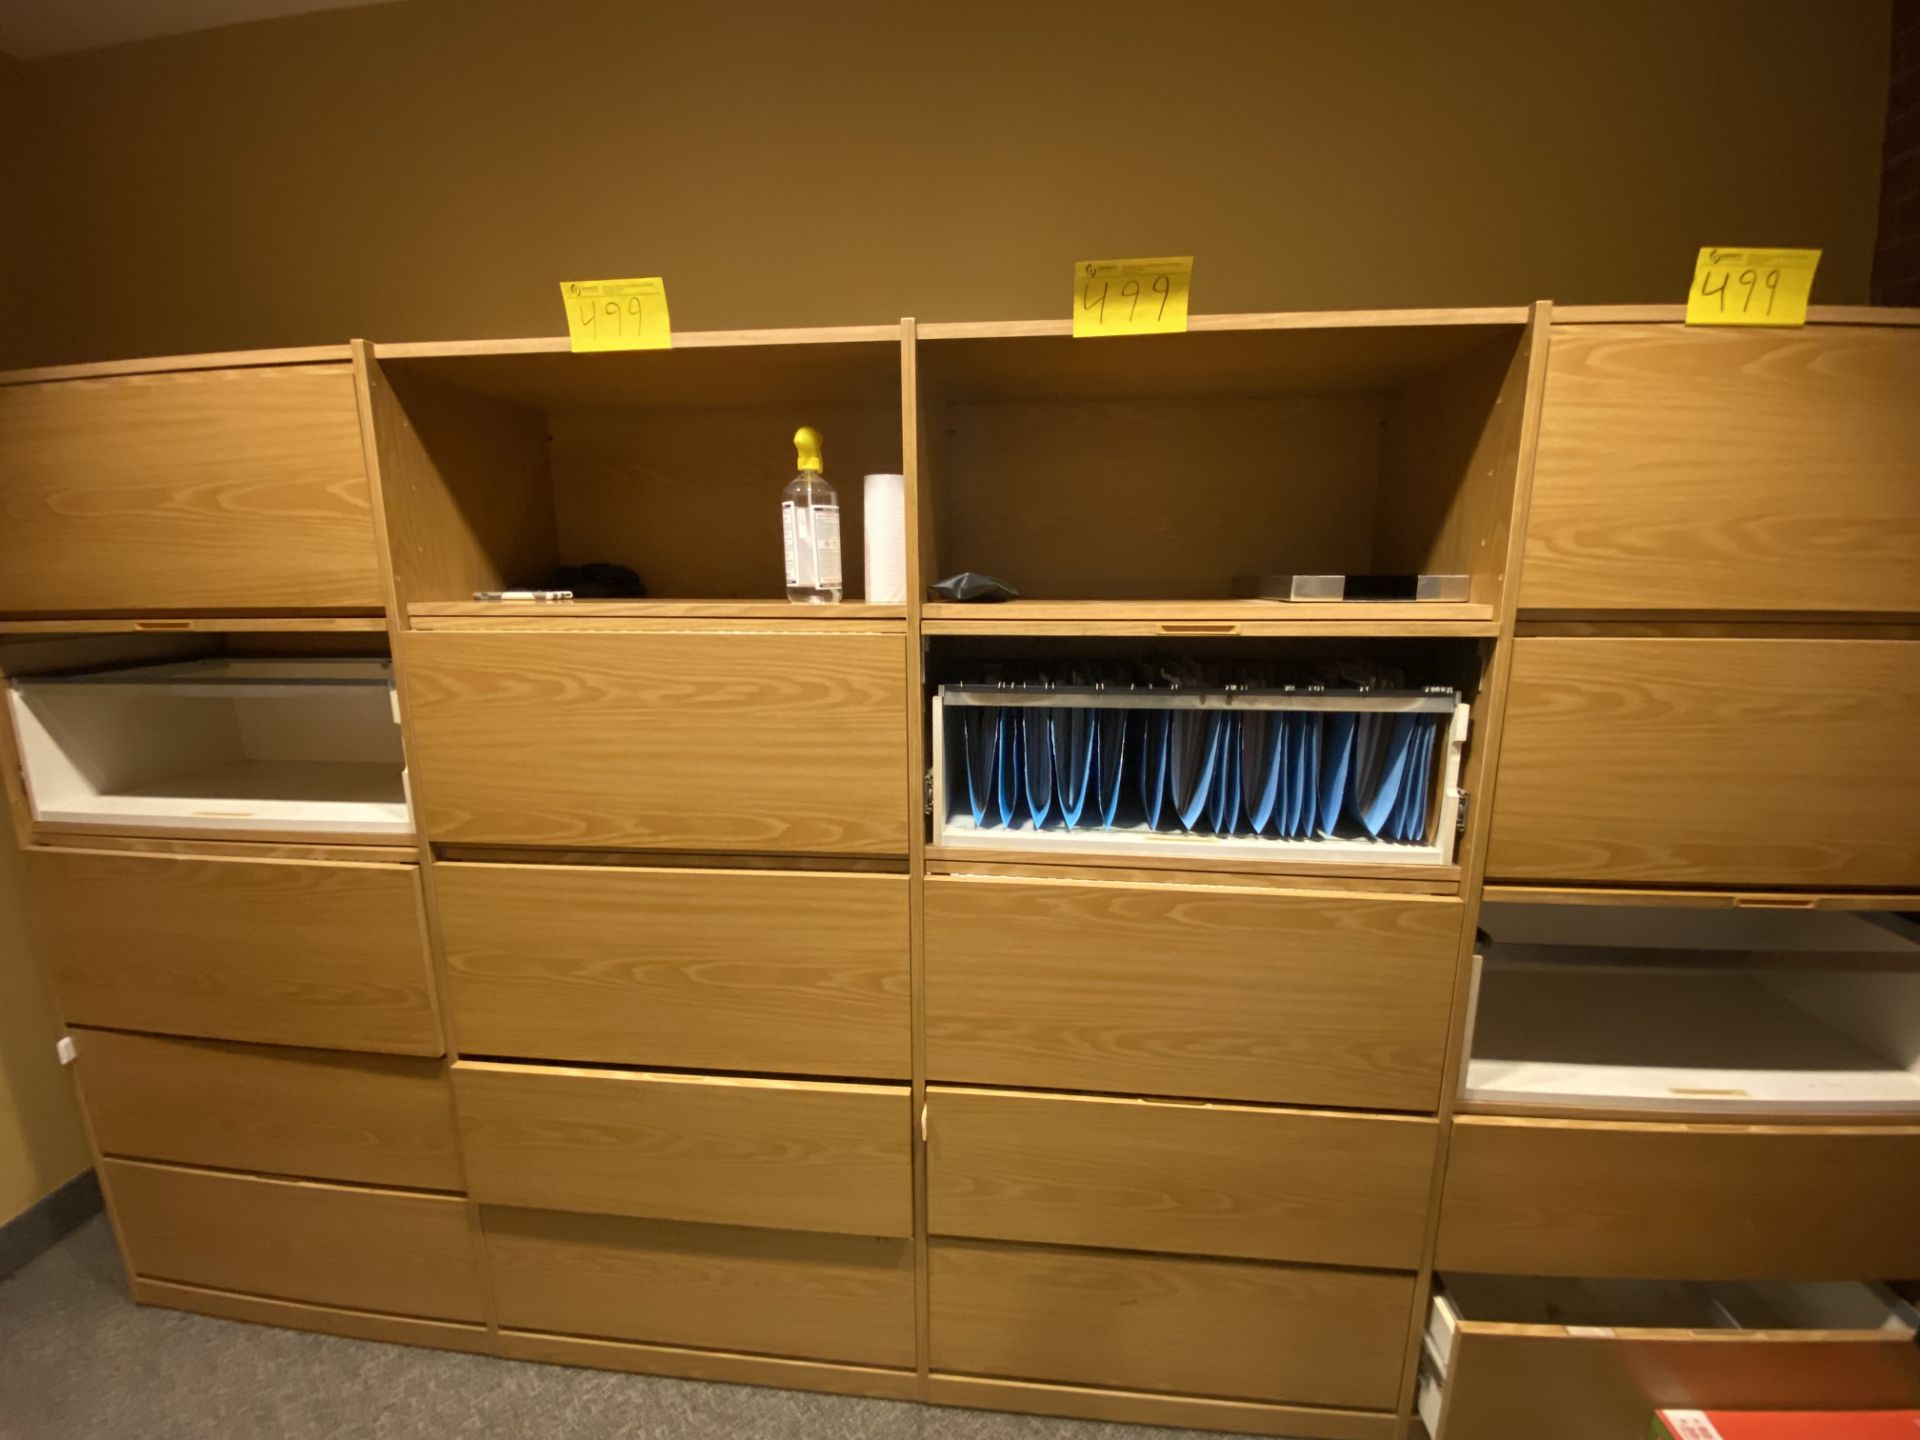 5-LEVEL FILE CABINET (4 SECTIONS PRO M402DW) - Image 2 of 2